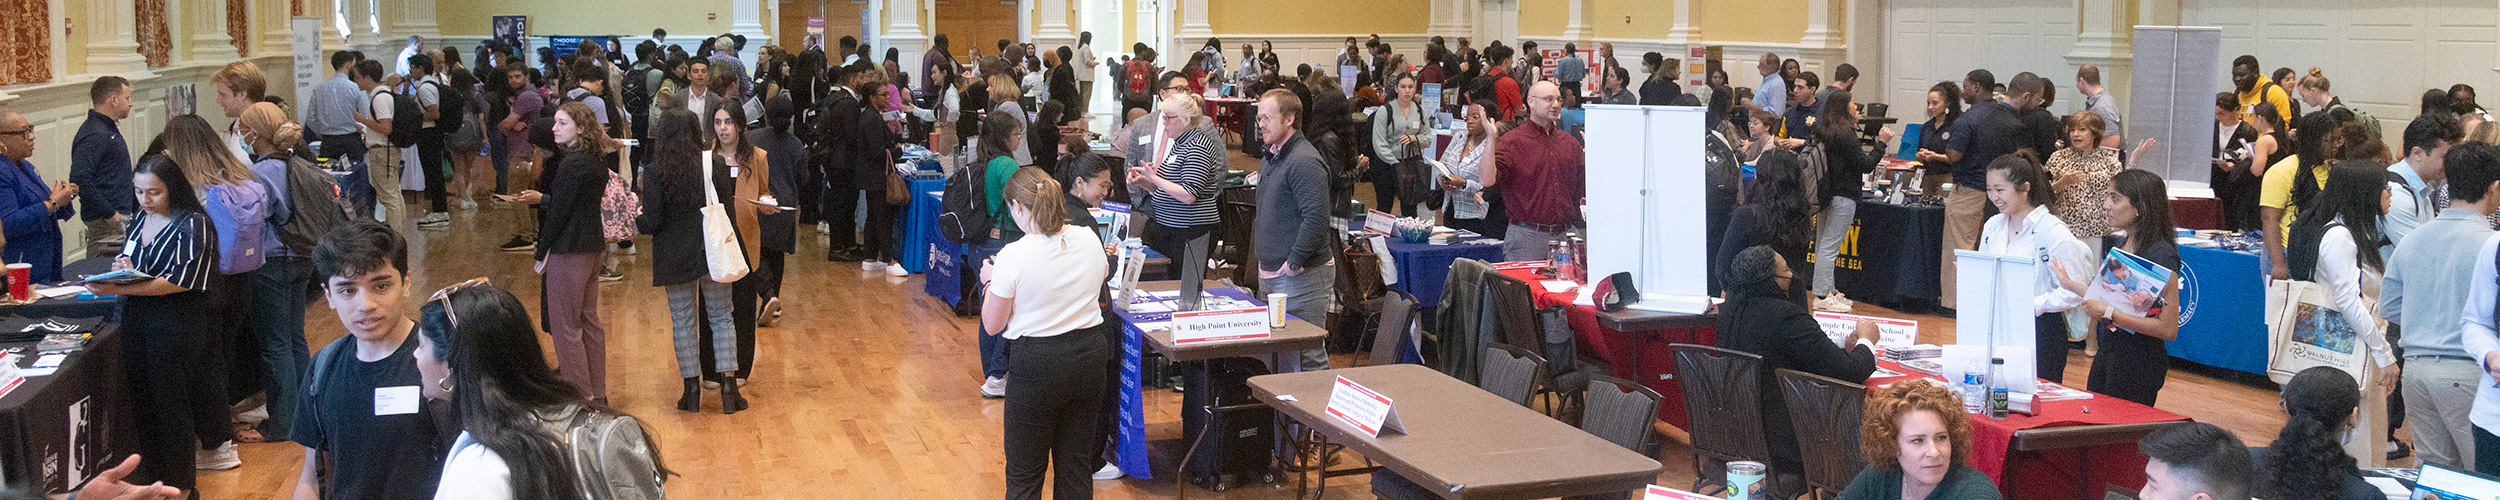 A large crowd of people, including students and representatives of many universities' medical schools, at the HPAO-hosted Health Professions Career Fair